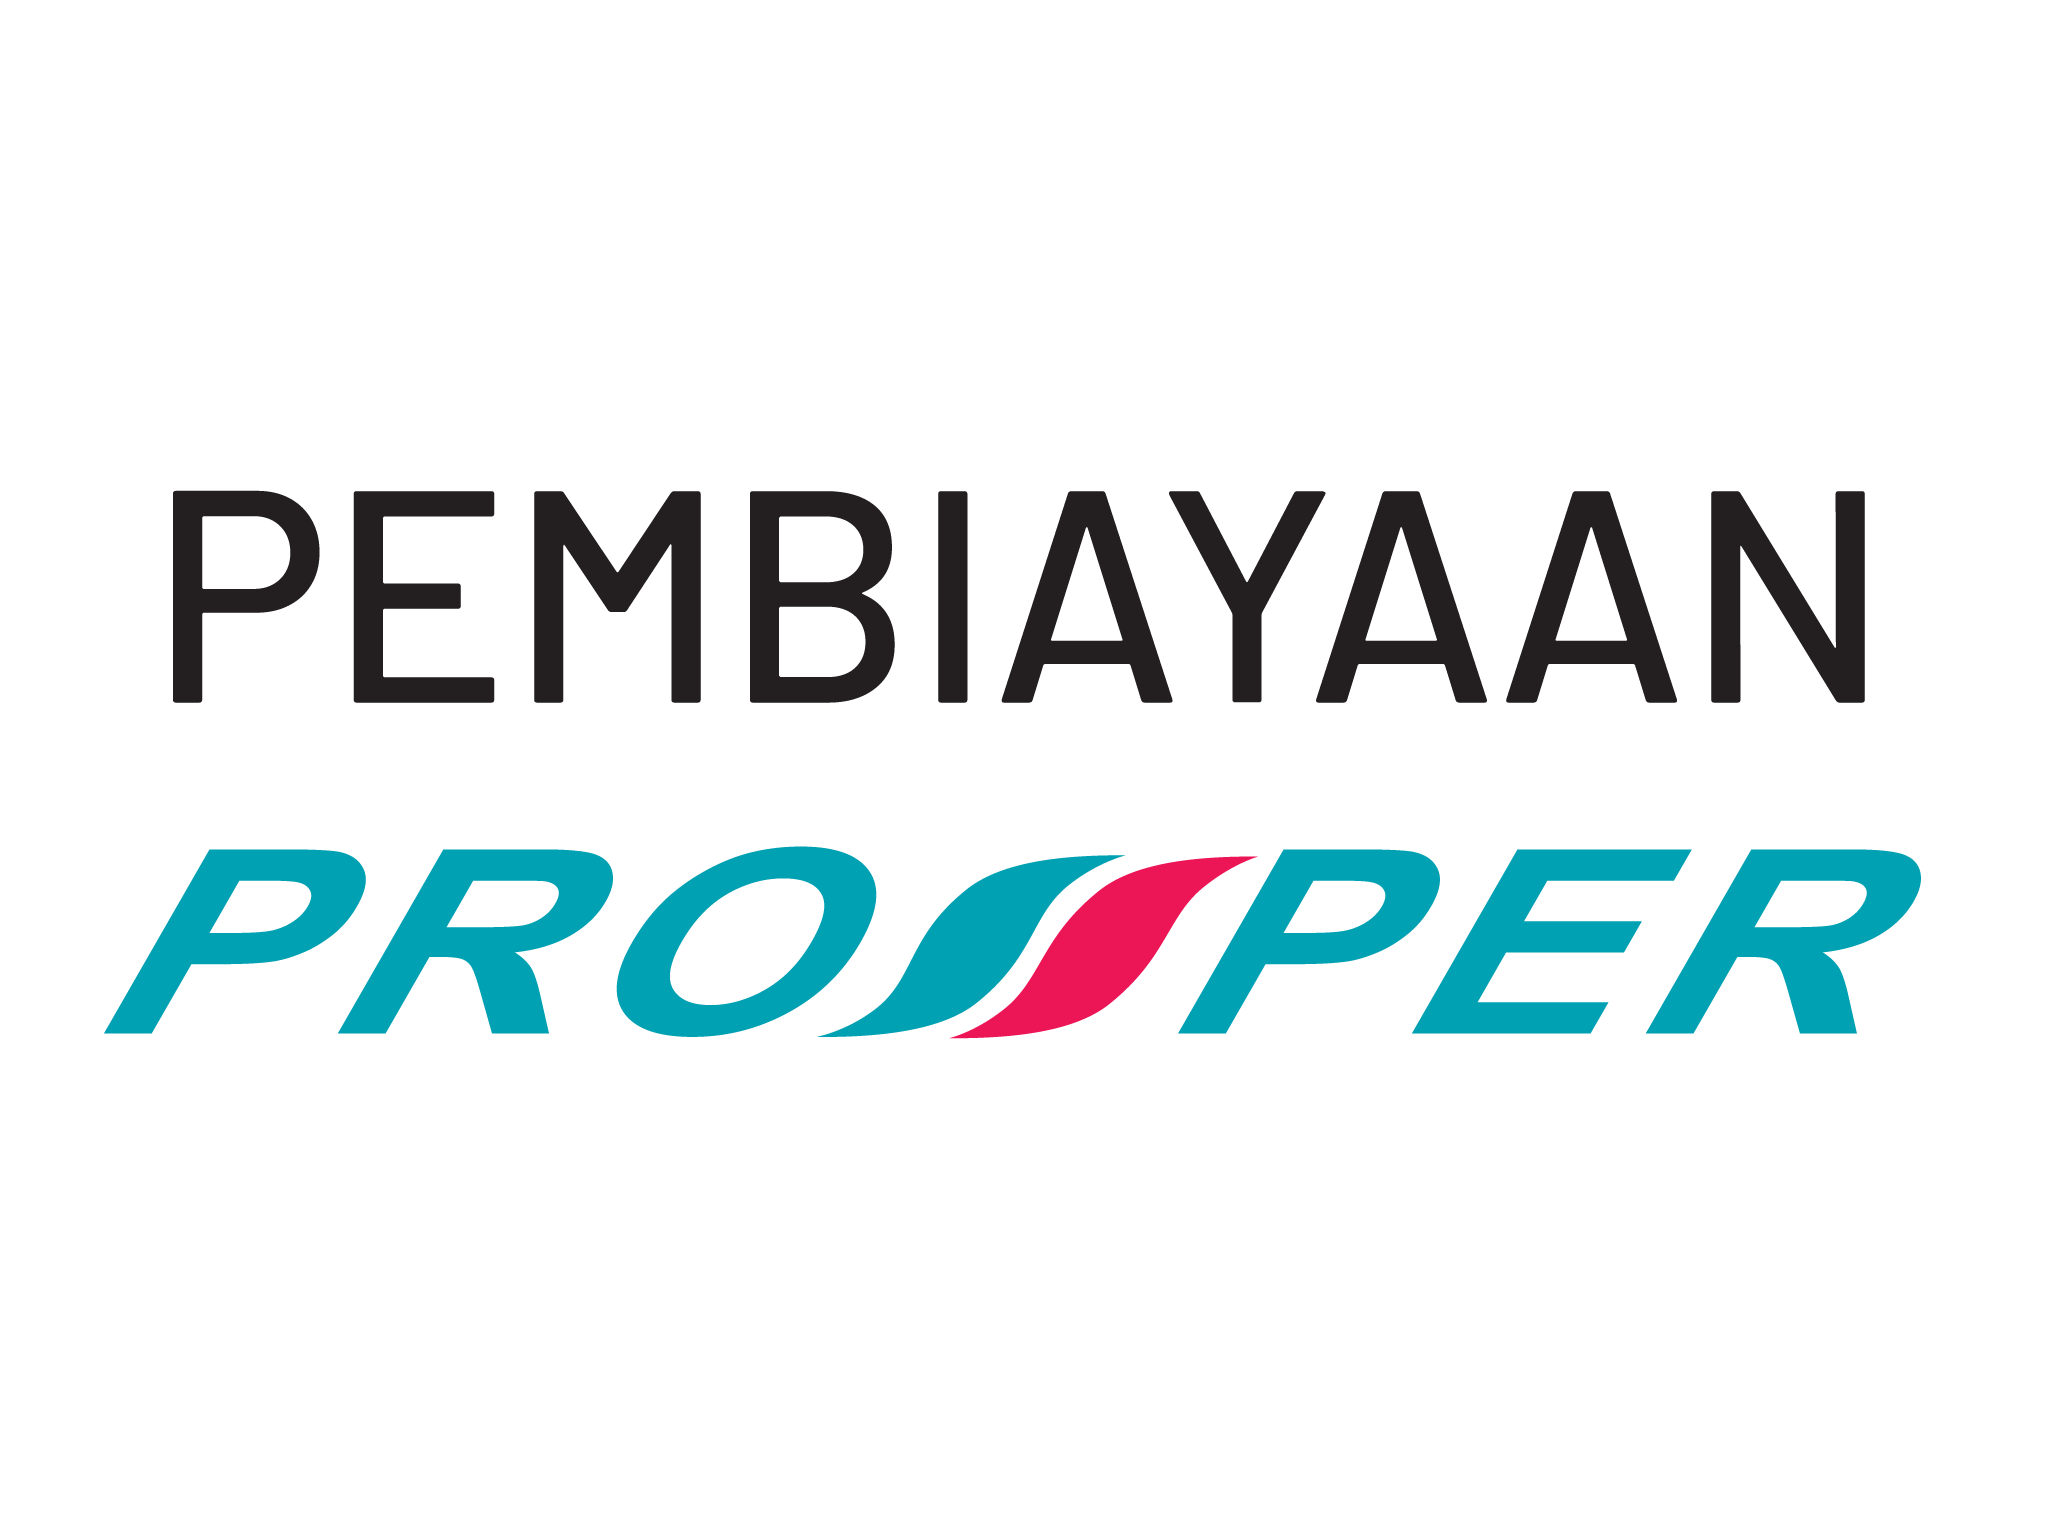 Pembiayaan PROSPER - Provide an integrated financing package comprising advisory support, business monitoring performance, business and entrepreneurial development through courses and training.